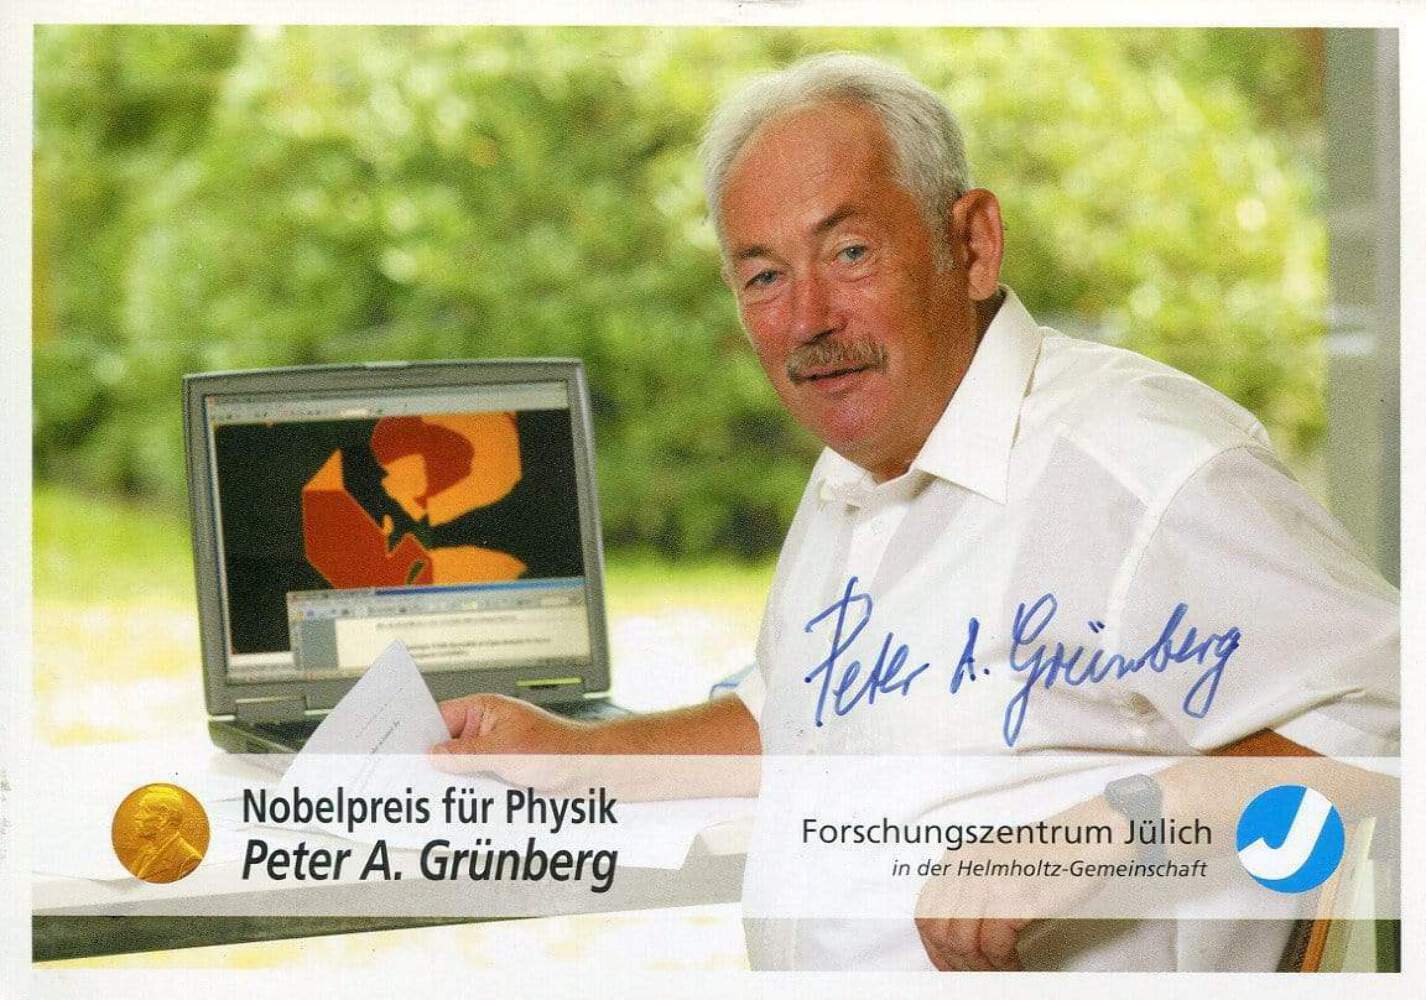 Peter Andreas Grünberg (+) autograph, NOBEL PRIZE in physics, signed Photo Poster painting